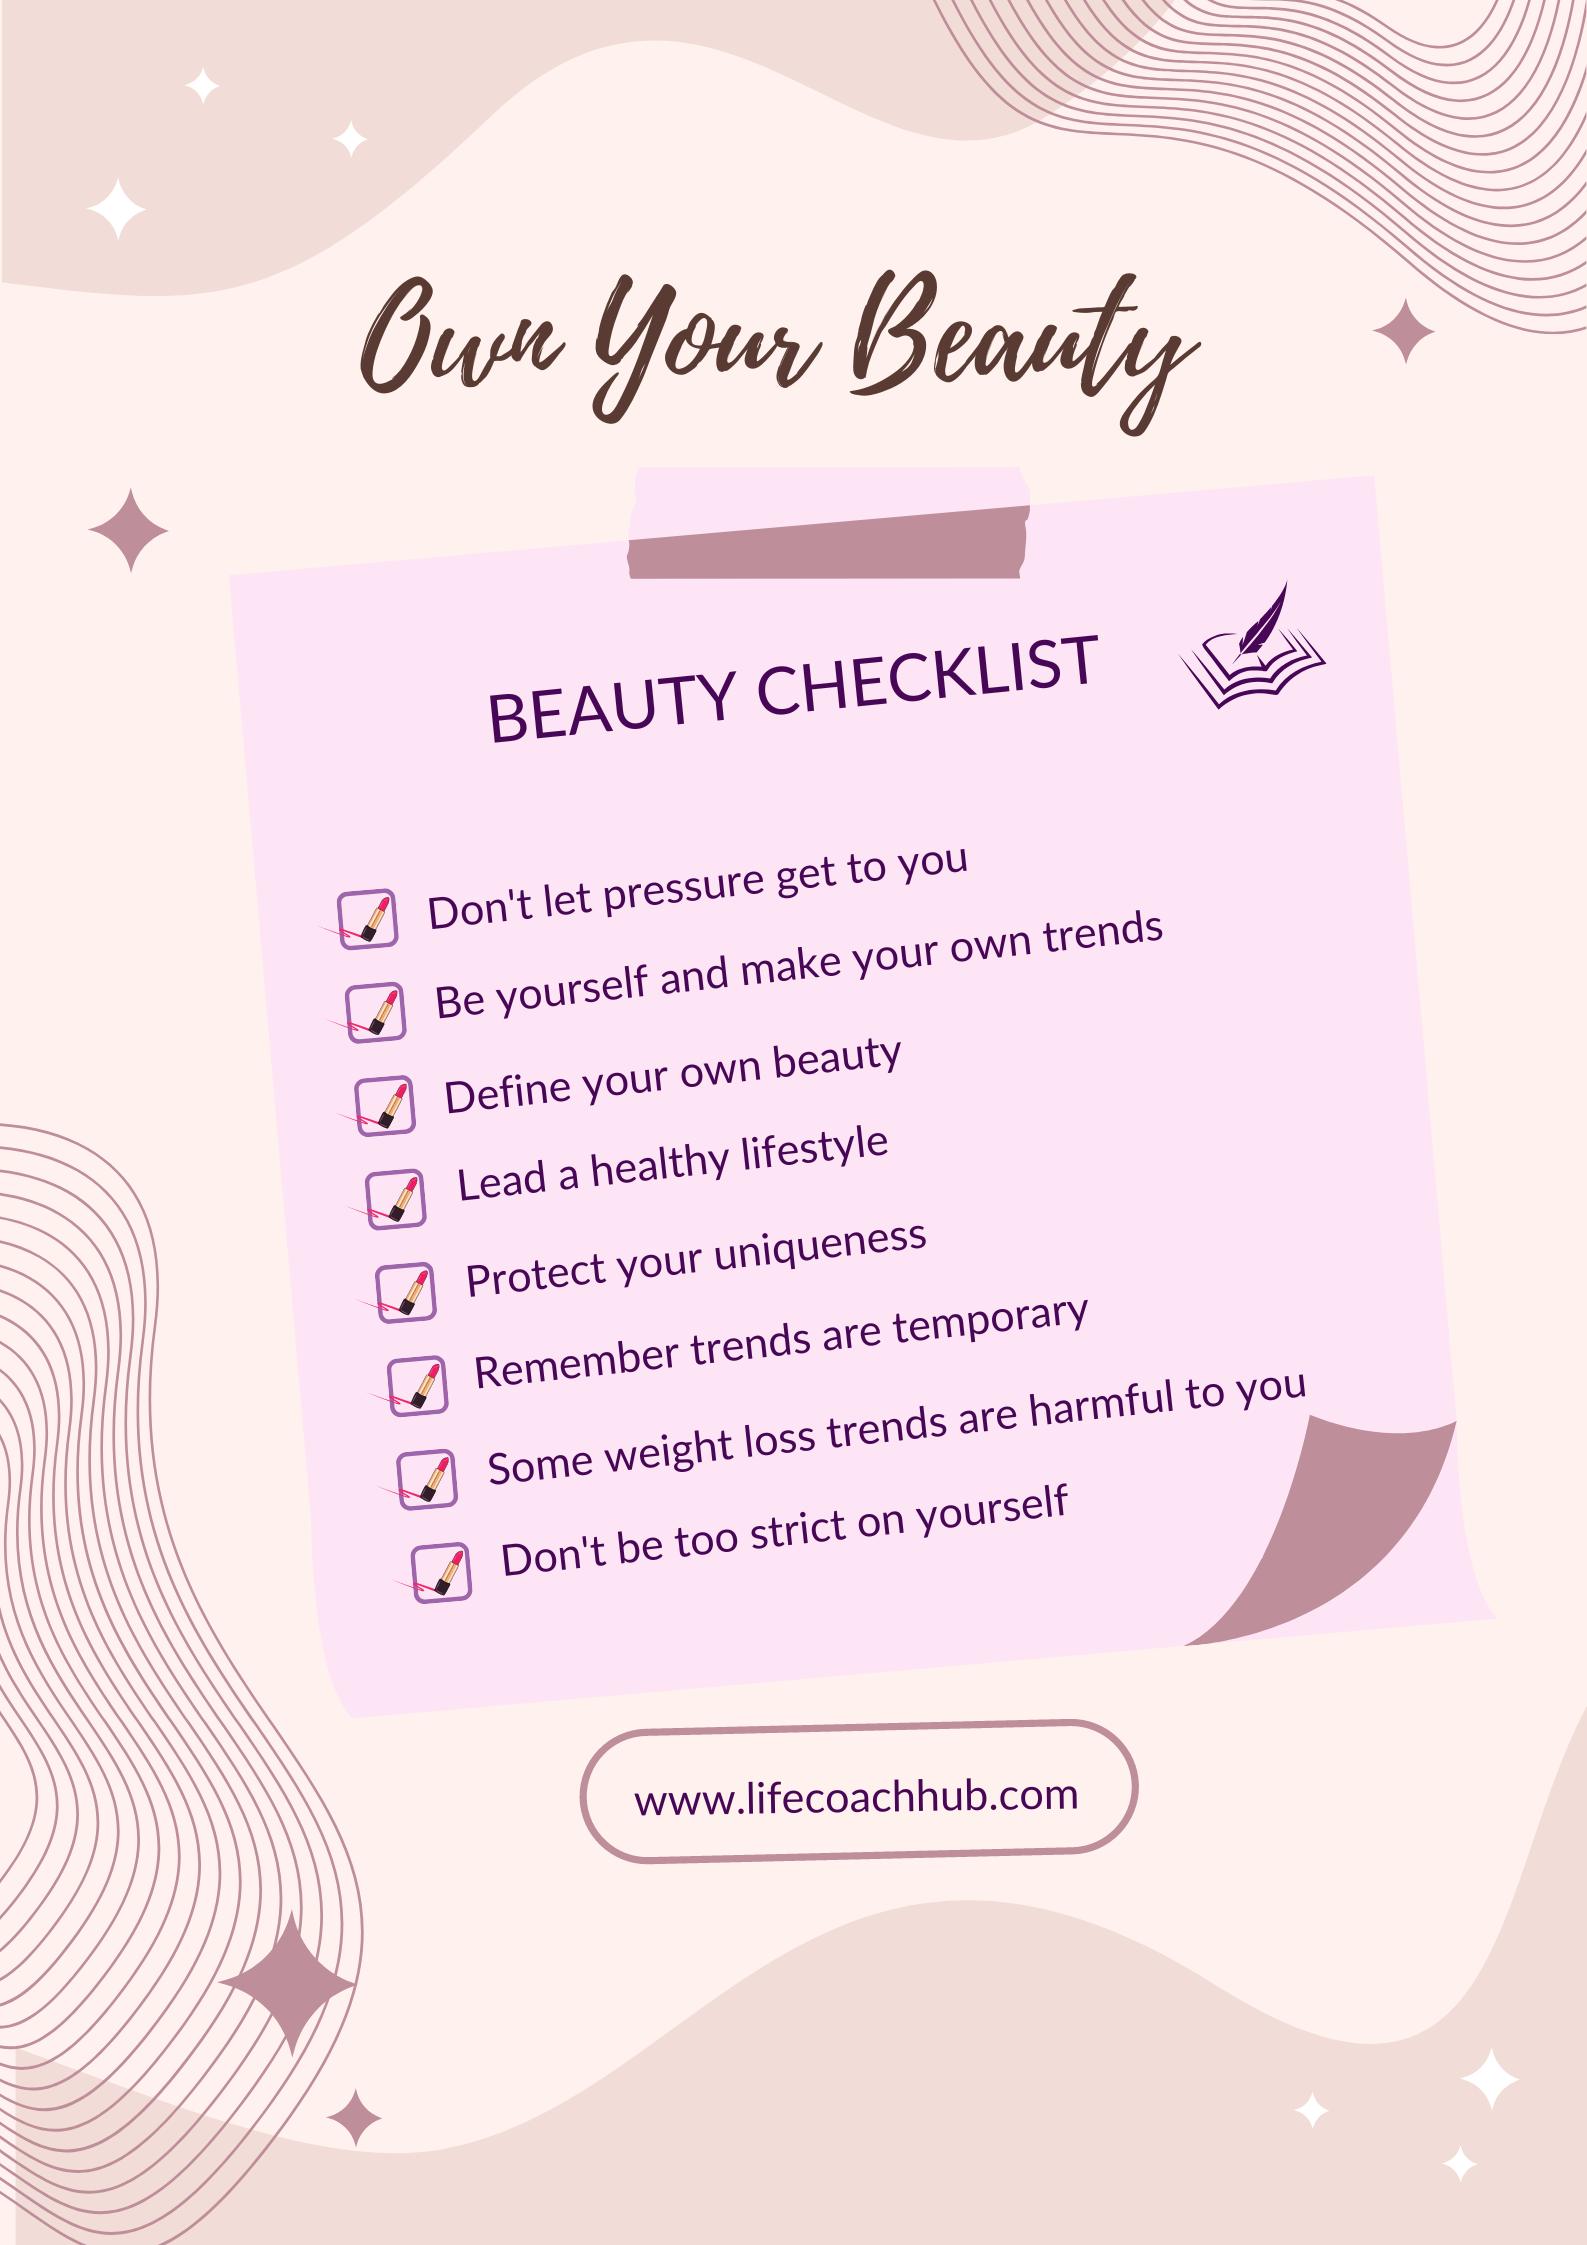 Beauty checklist to set your own beauty